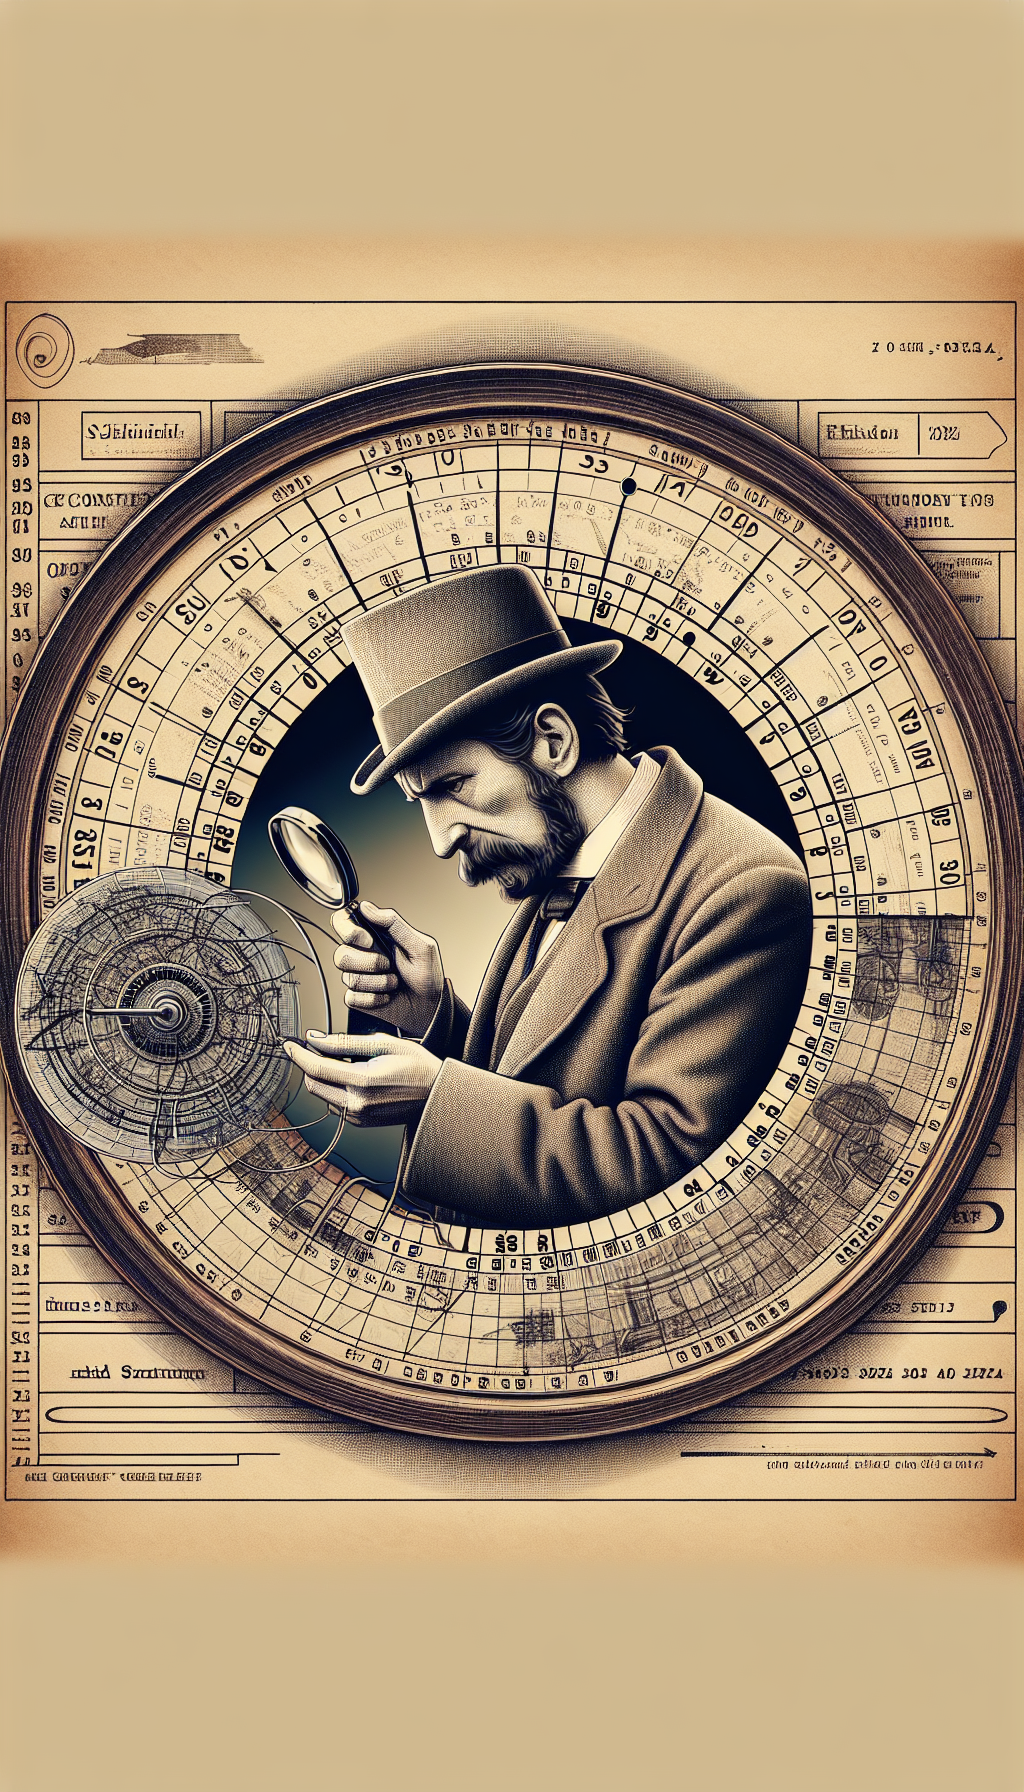 An illustration depicting Sherlock Holmes examining a magnified antique tool with a magnifying glass, surrounded by a semi-transparent clock face with dates and eras marked around the edges. Shifting styles within the image, the tool is rendered in hyper-realistic detail, while elements of the clock transition into vintage etchings, symbolizing the merging of modern analysis with historical context for precise tool dating.